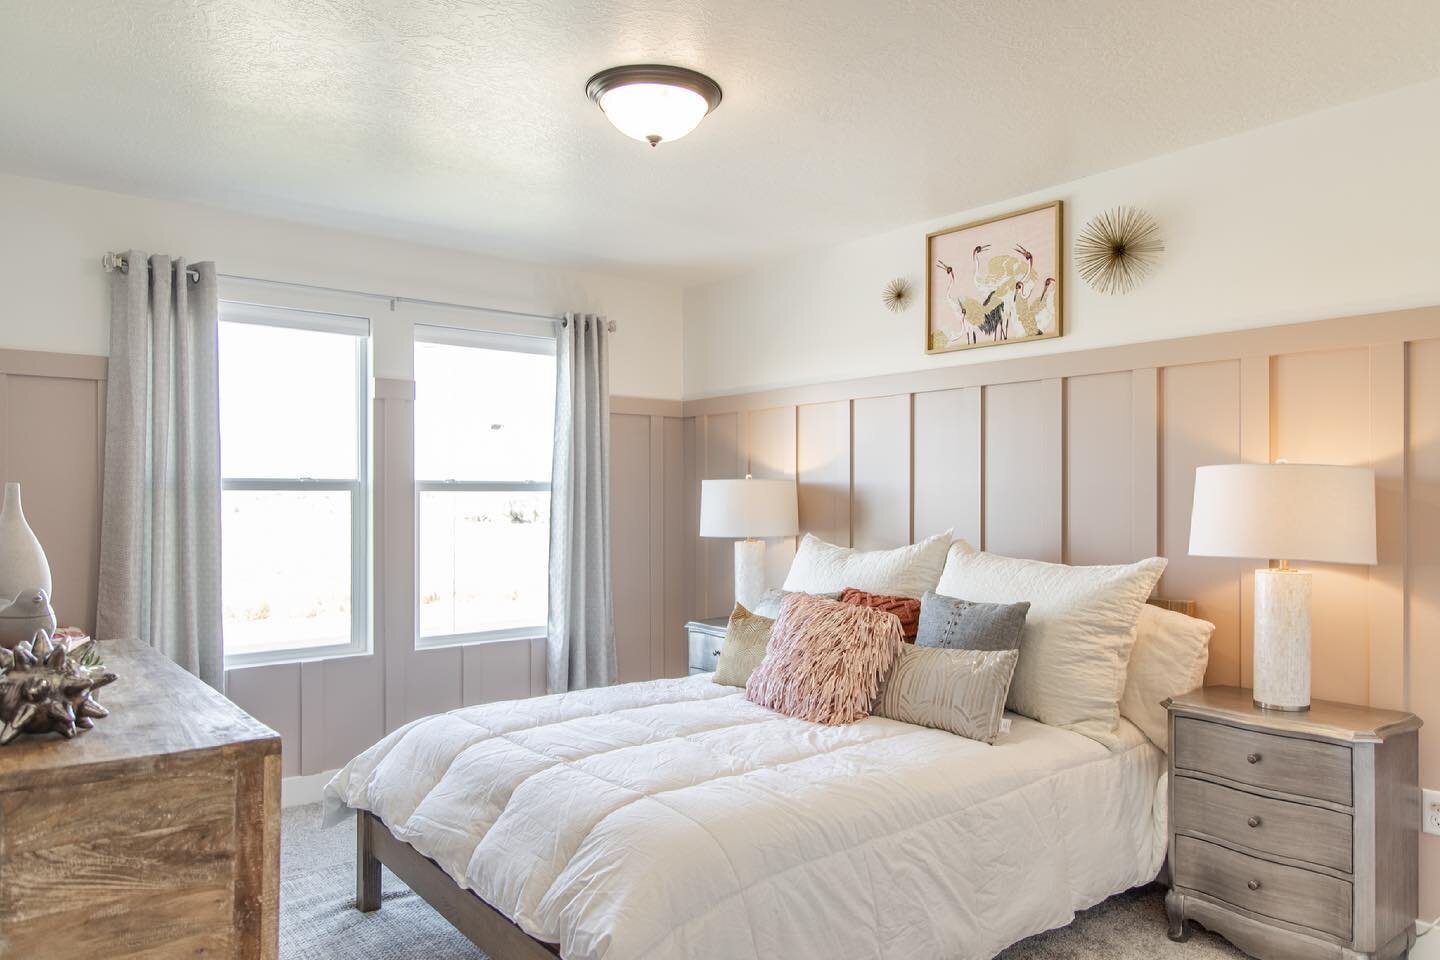 Took this cute little girls&rsquo; room to a whole new level with pale pink board and batten.  Added a few layers of texture and some antique brass accents for the win! 
This Aspire Homes model home is nothing short of a dream. 

Aspire Homes 
Aspire